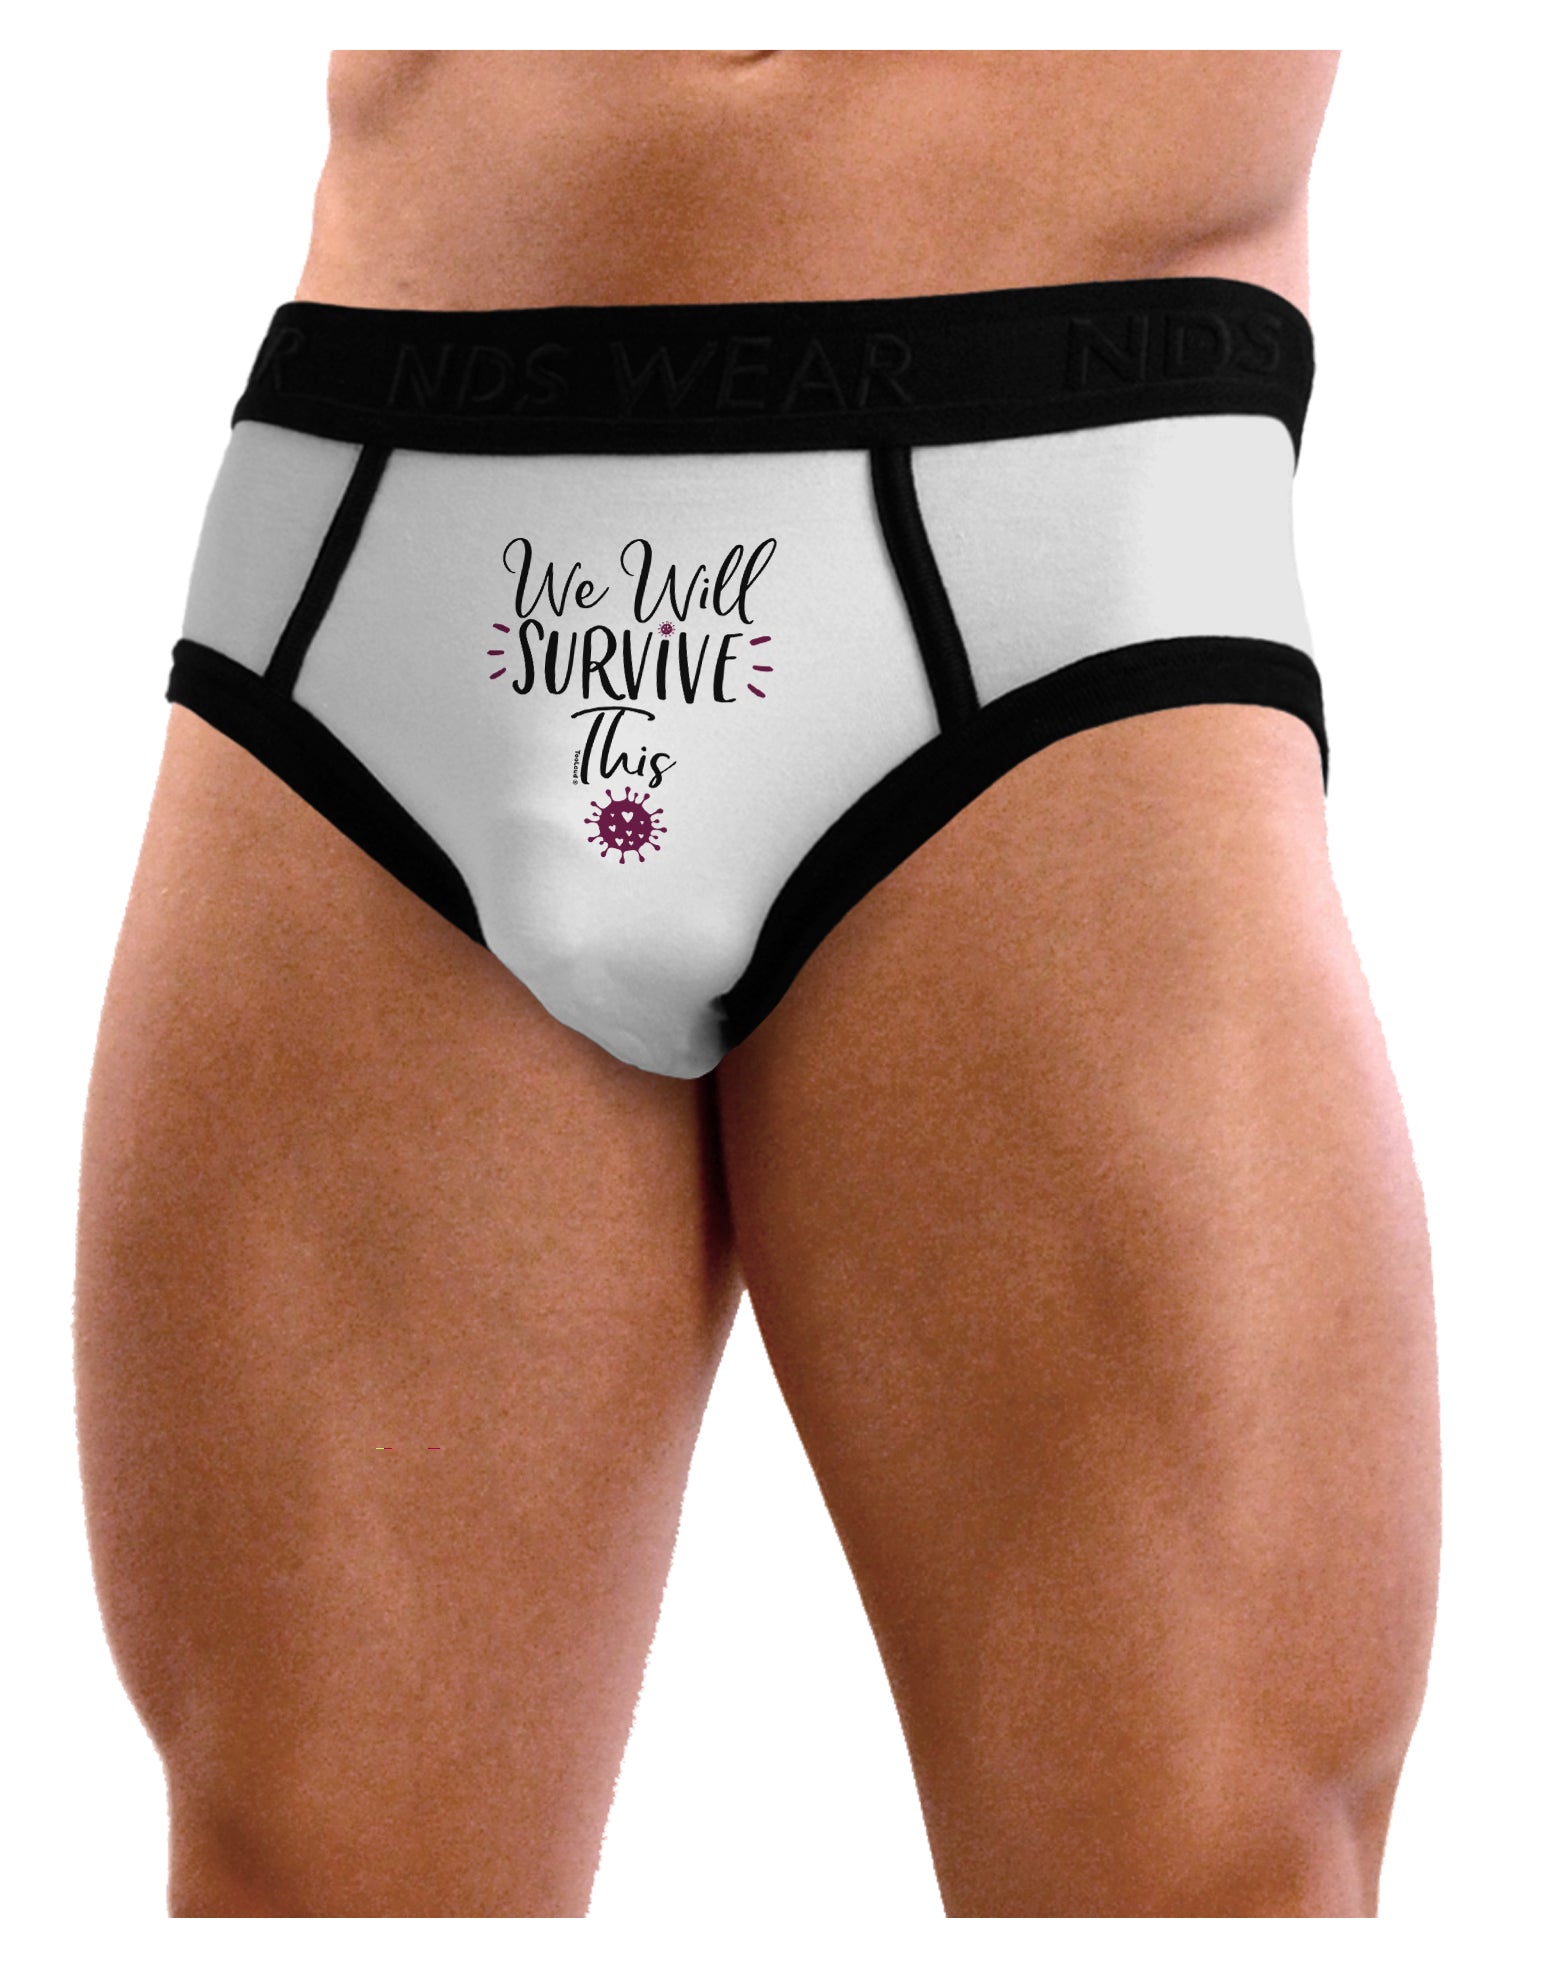 We will Survive This Mens NDS Wear Briefs Underwear Small Tooloud